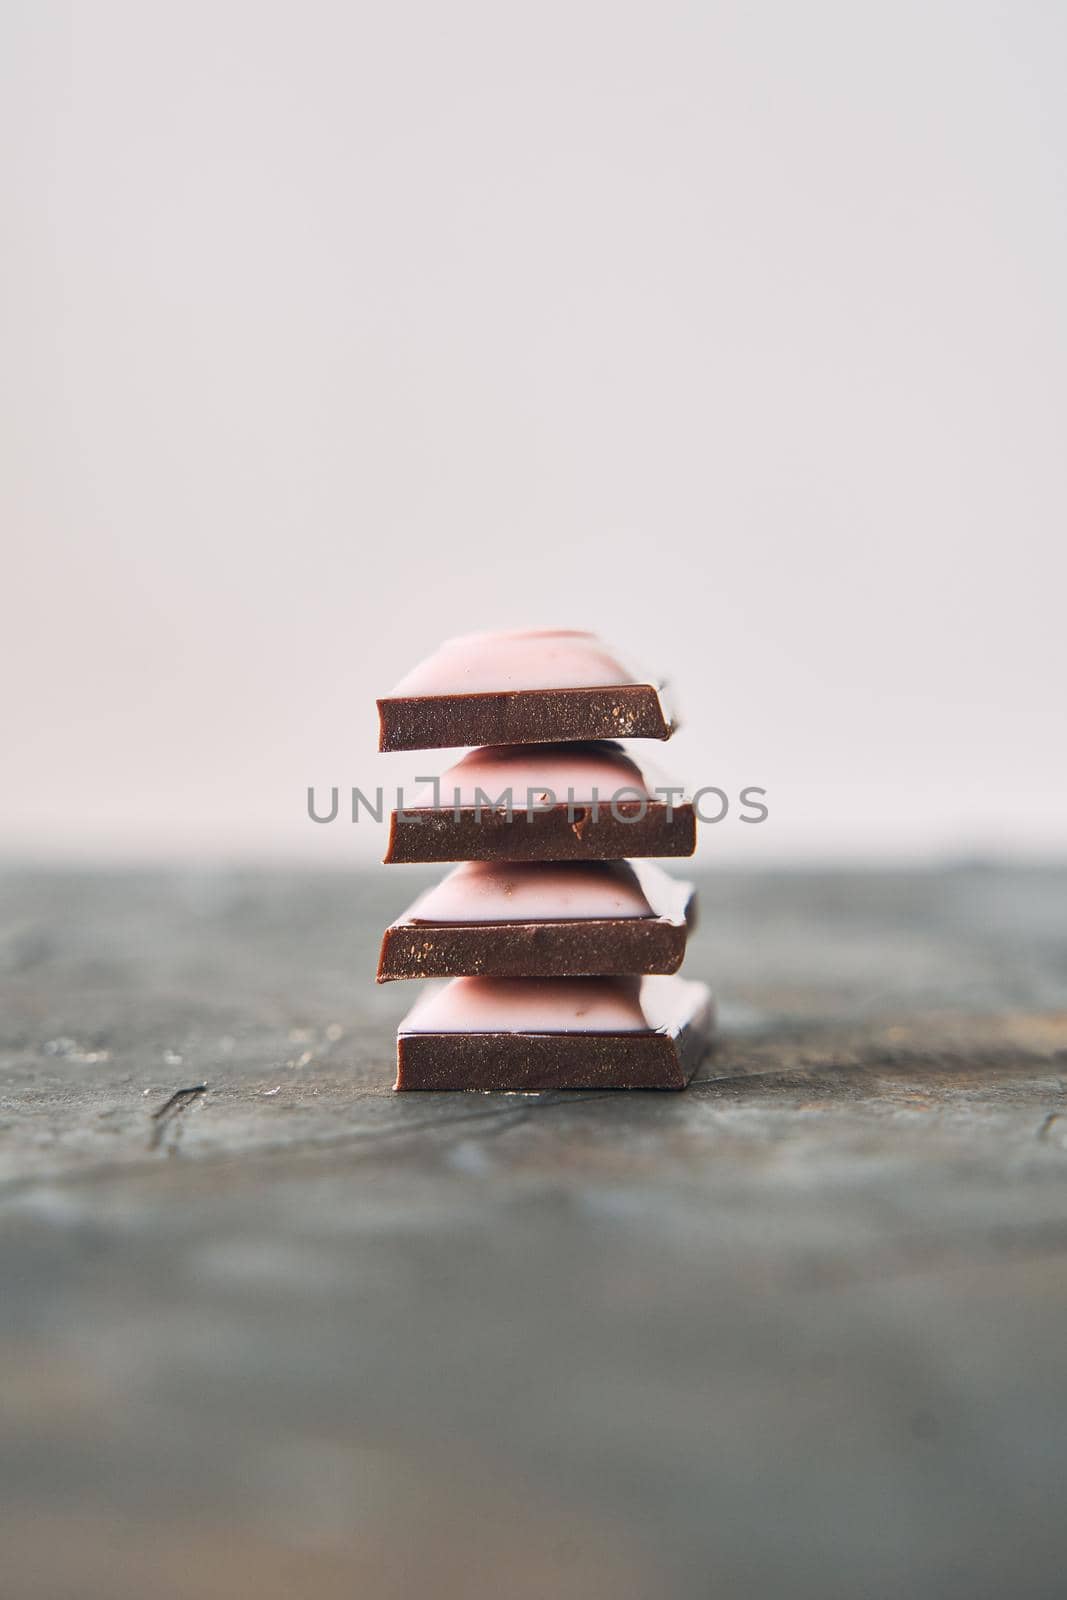 Selective Focus on Four Chocolate Slices on a Dark Background. High quality photo